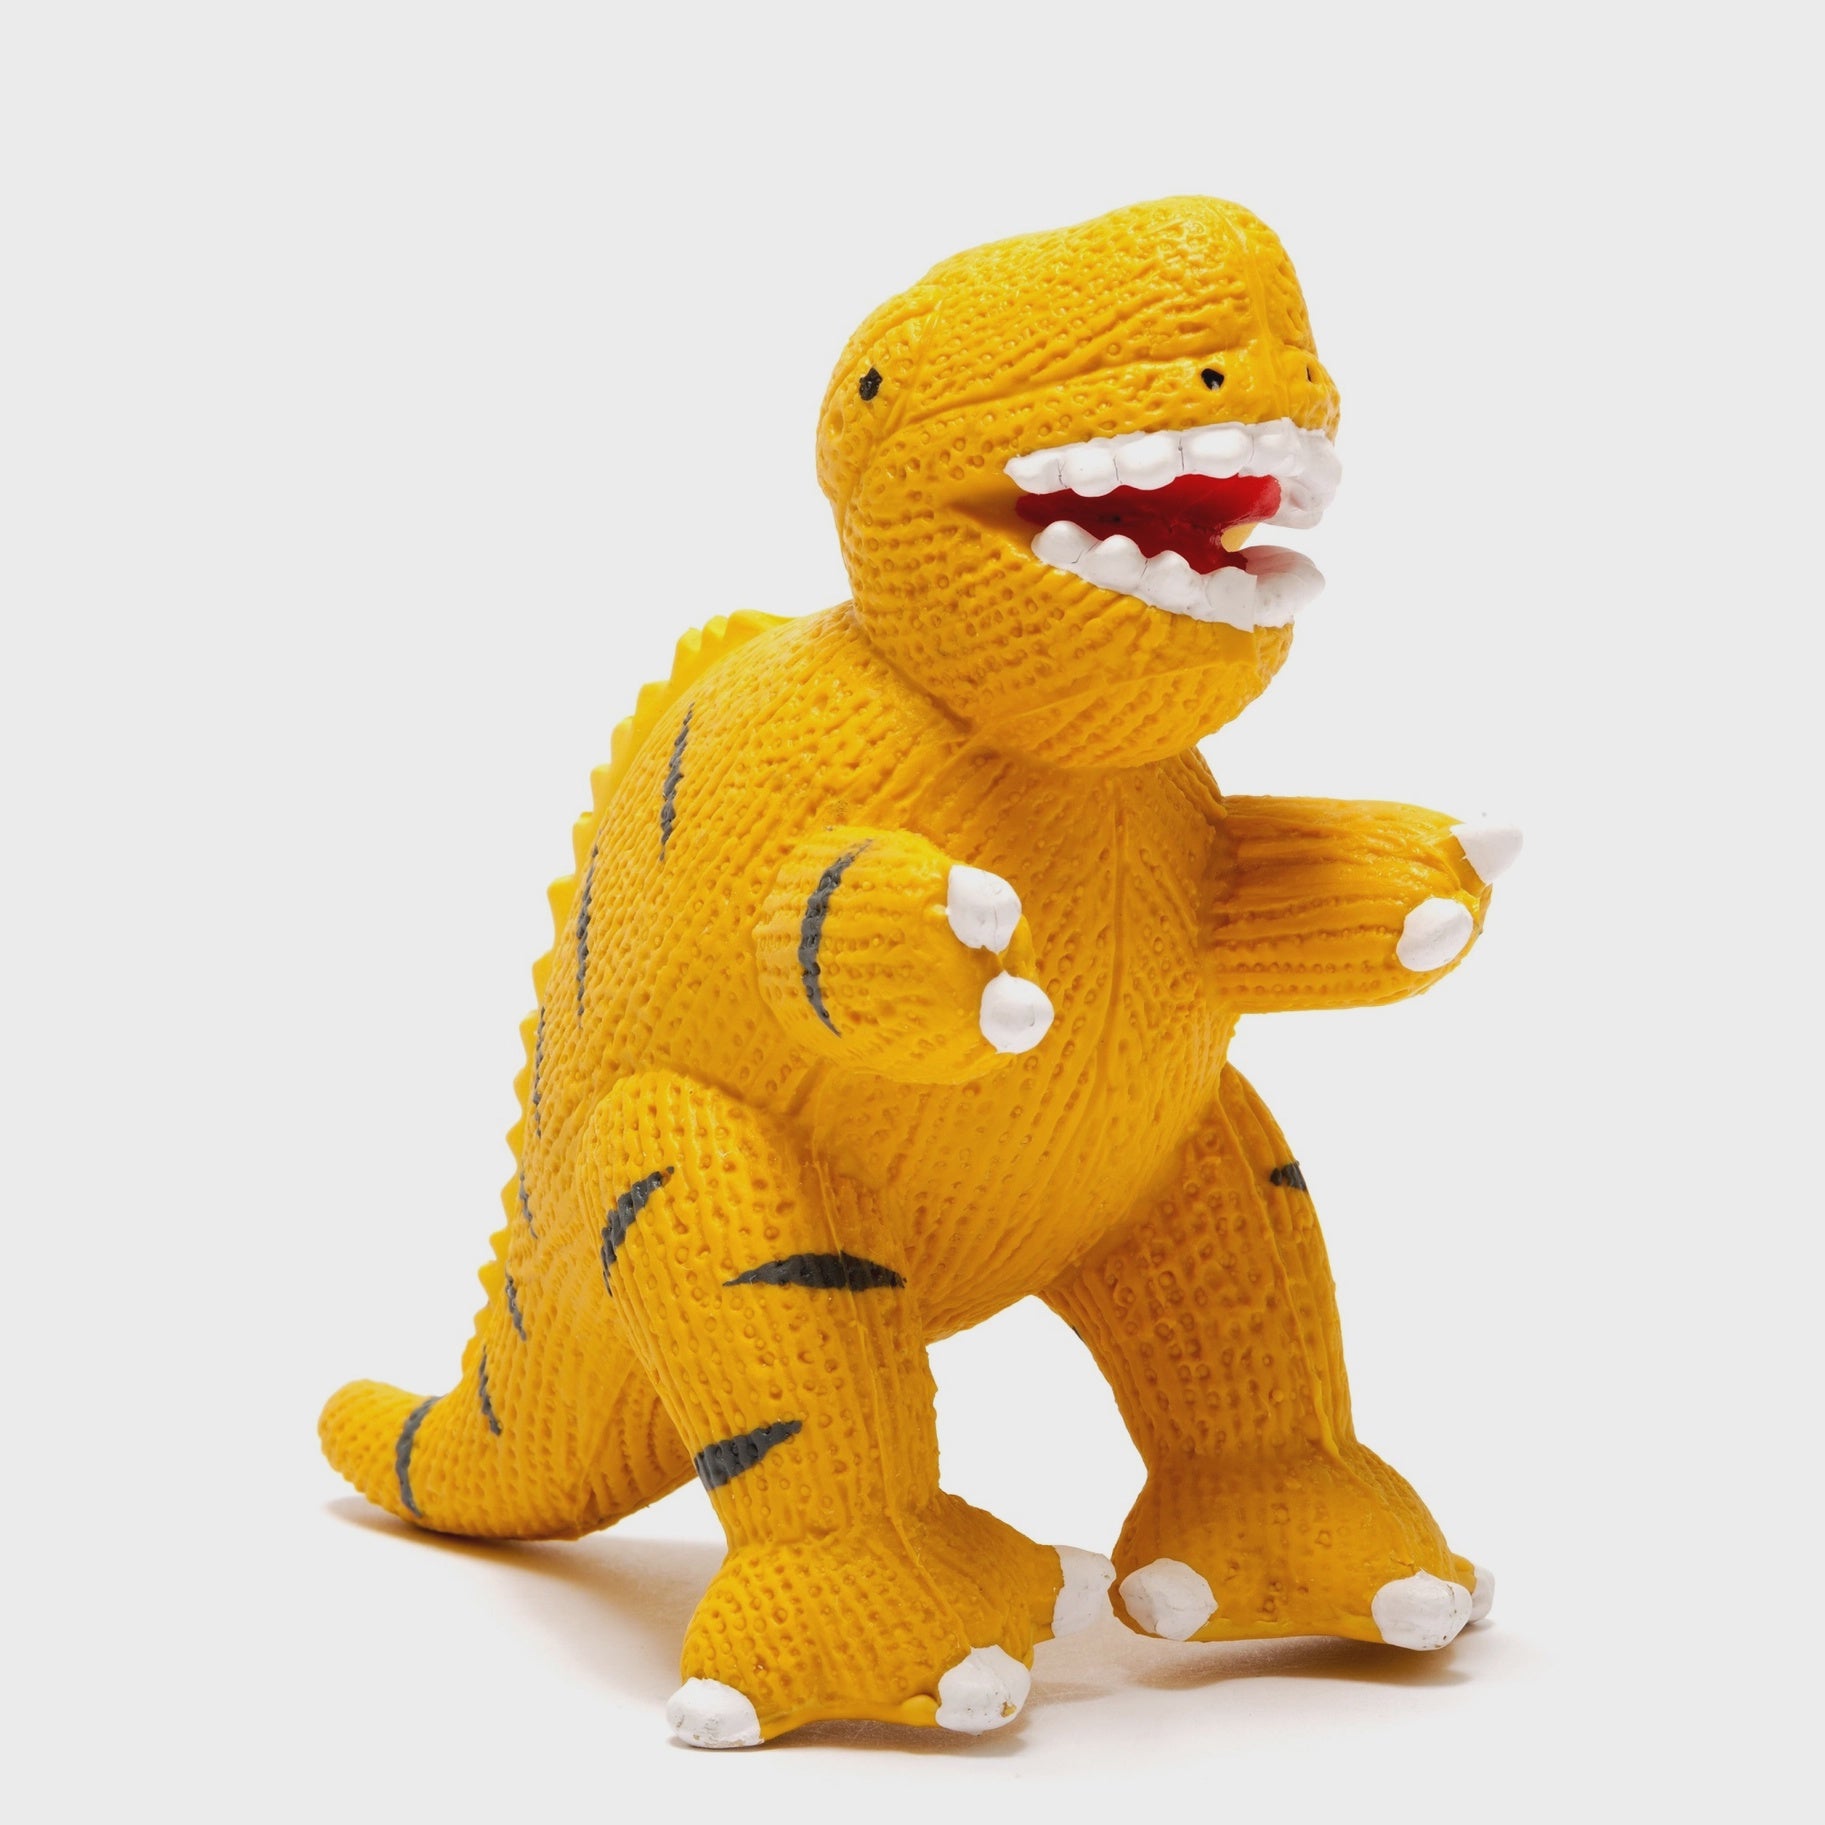 Natural Rubber Dinosaur Toy - Yellow T-Rex